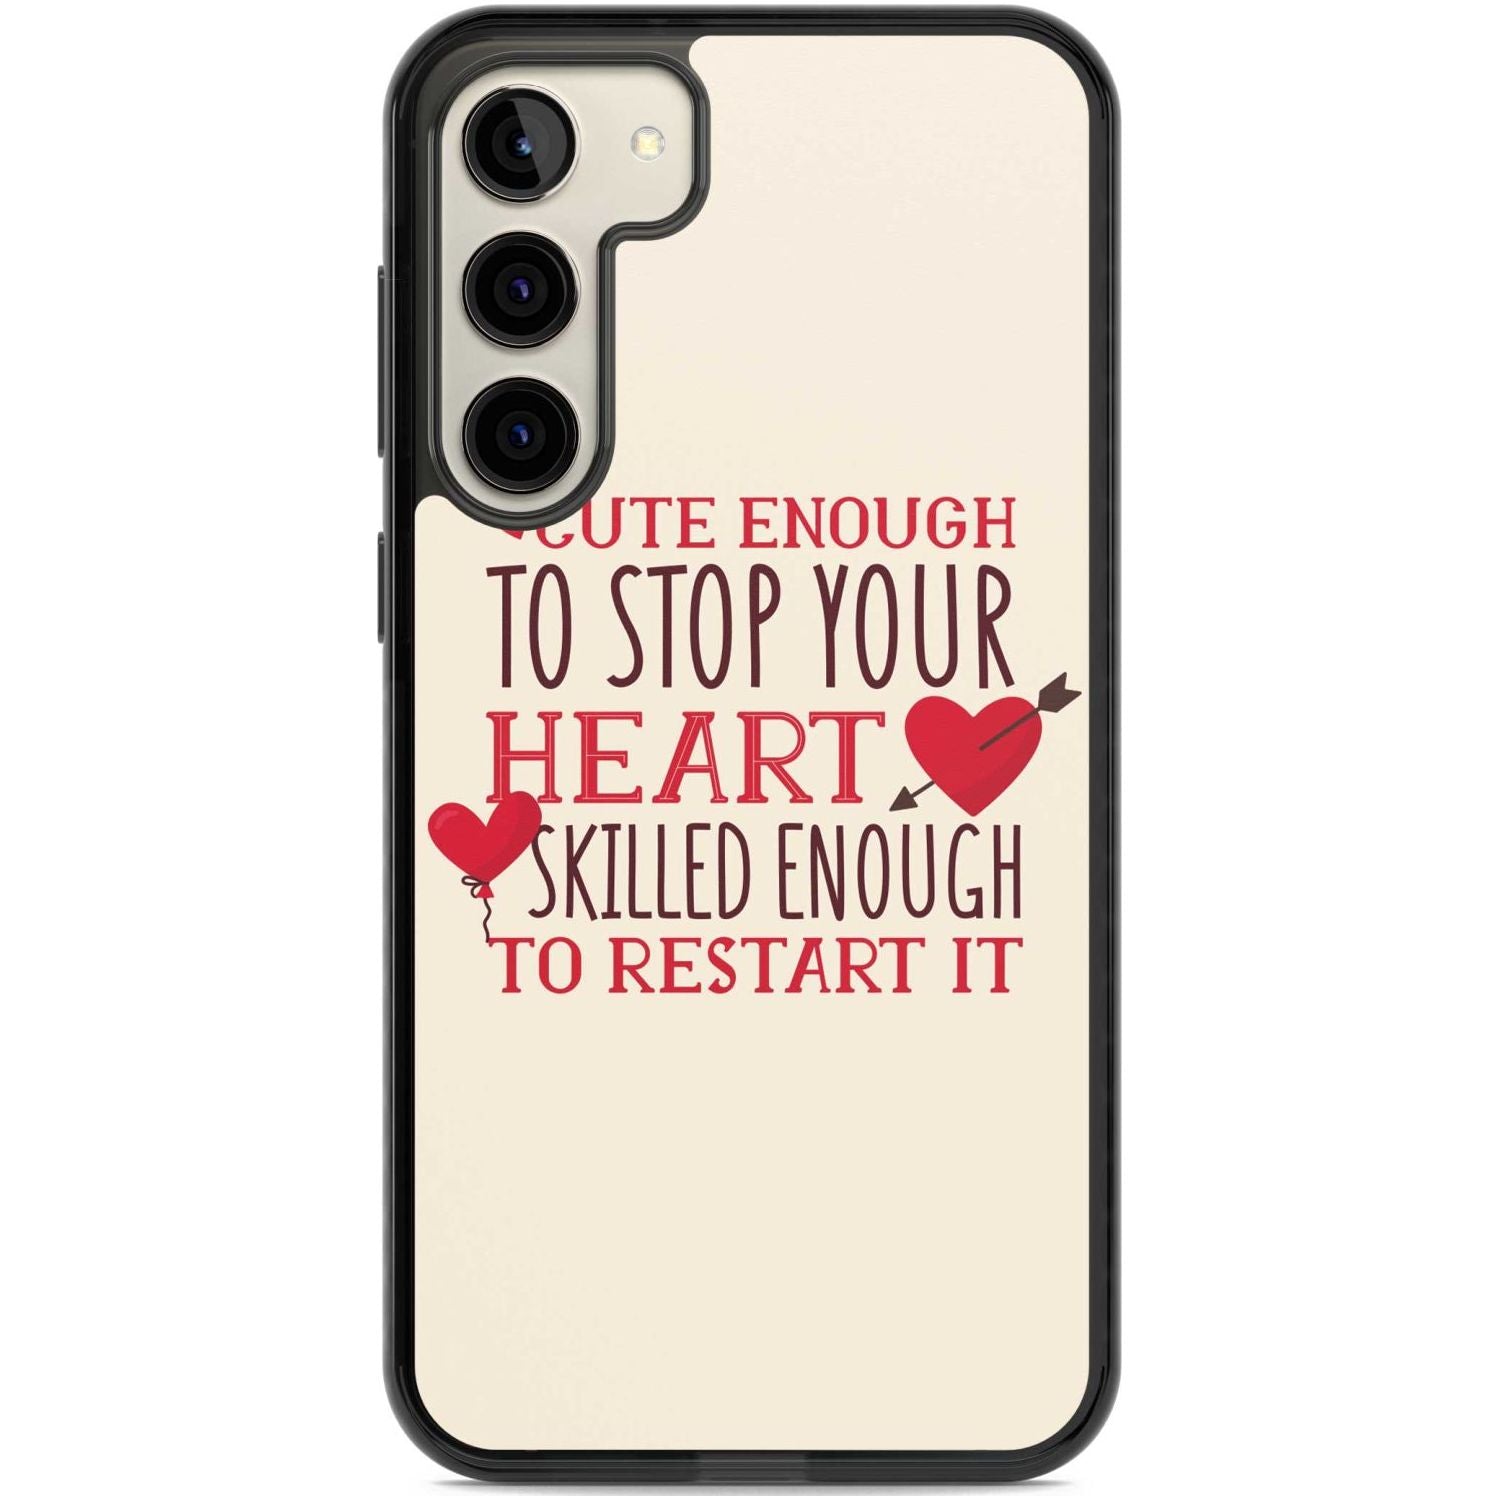 Medical Design Cute Enough to Stop Your Heart Phone Case Samsung S22 Plus / Black Impact Case,Samsung S23 Plus / Black Impact Case Blanc Space